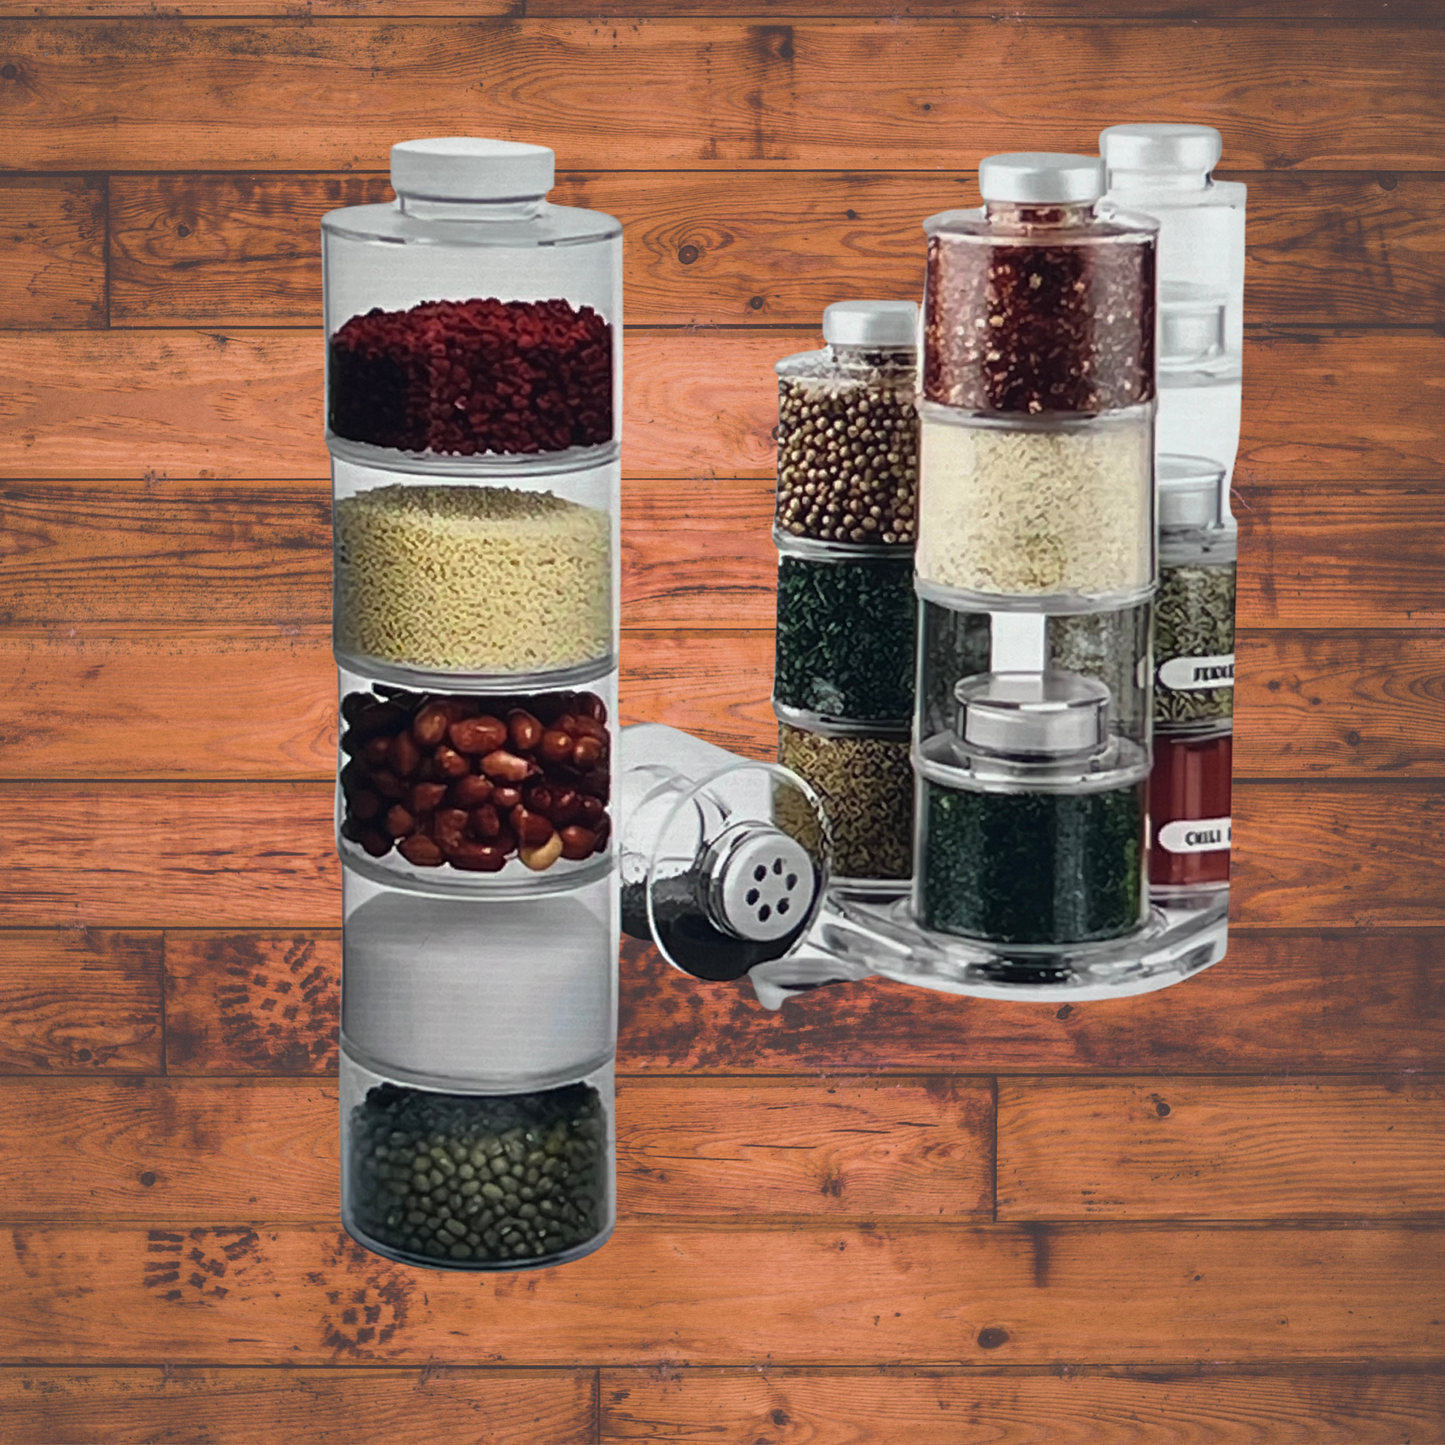 6  Pcs Stackable Spice Pot Spice Tower, Transparent Seasoning Bottles in Spice Colors, Space Saving and Organized Spice Storage Solution for Kitchen, BPA Free and Easy to Identify